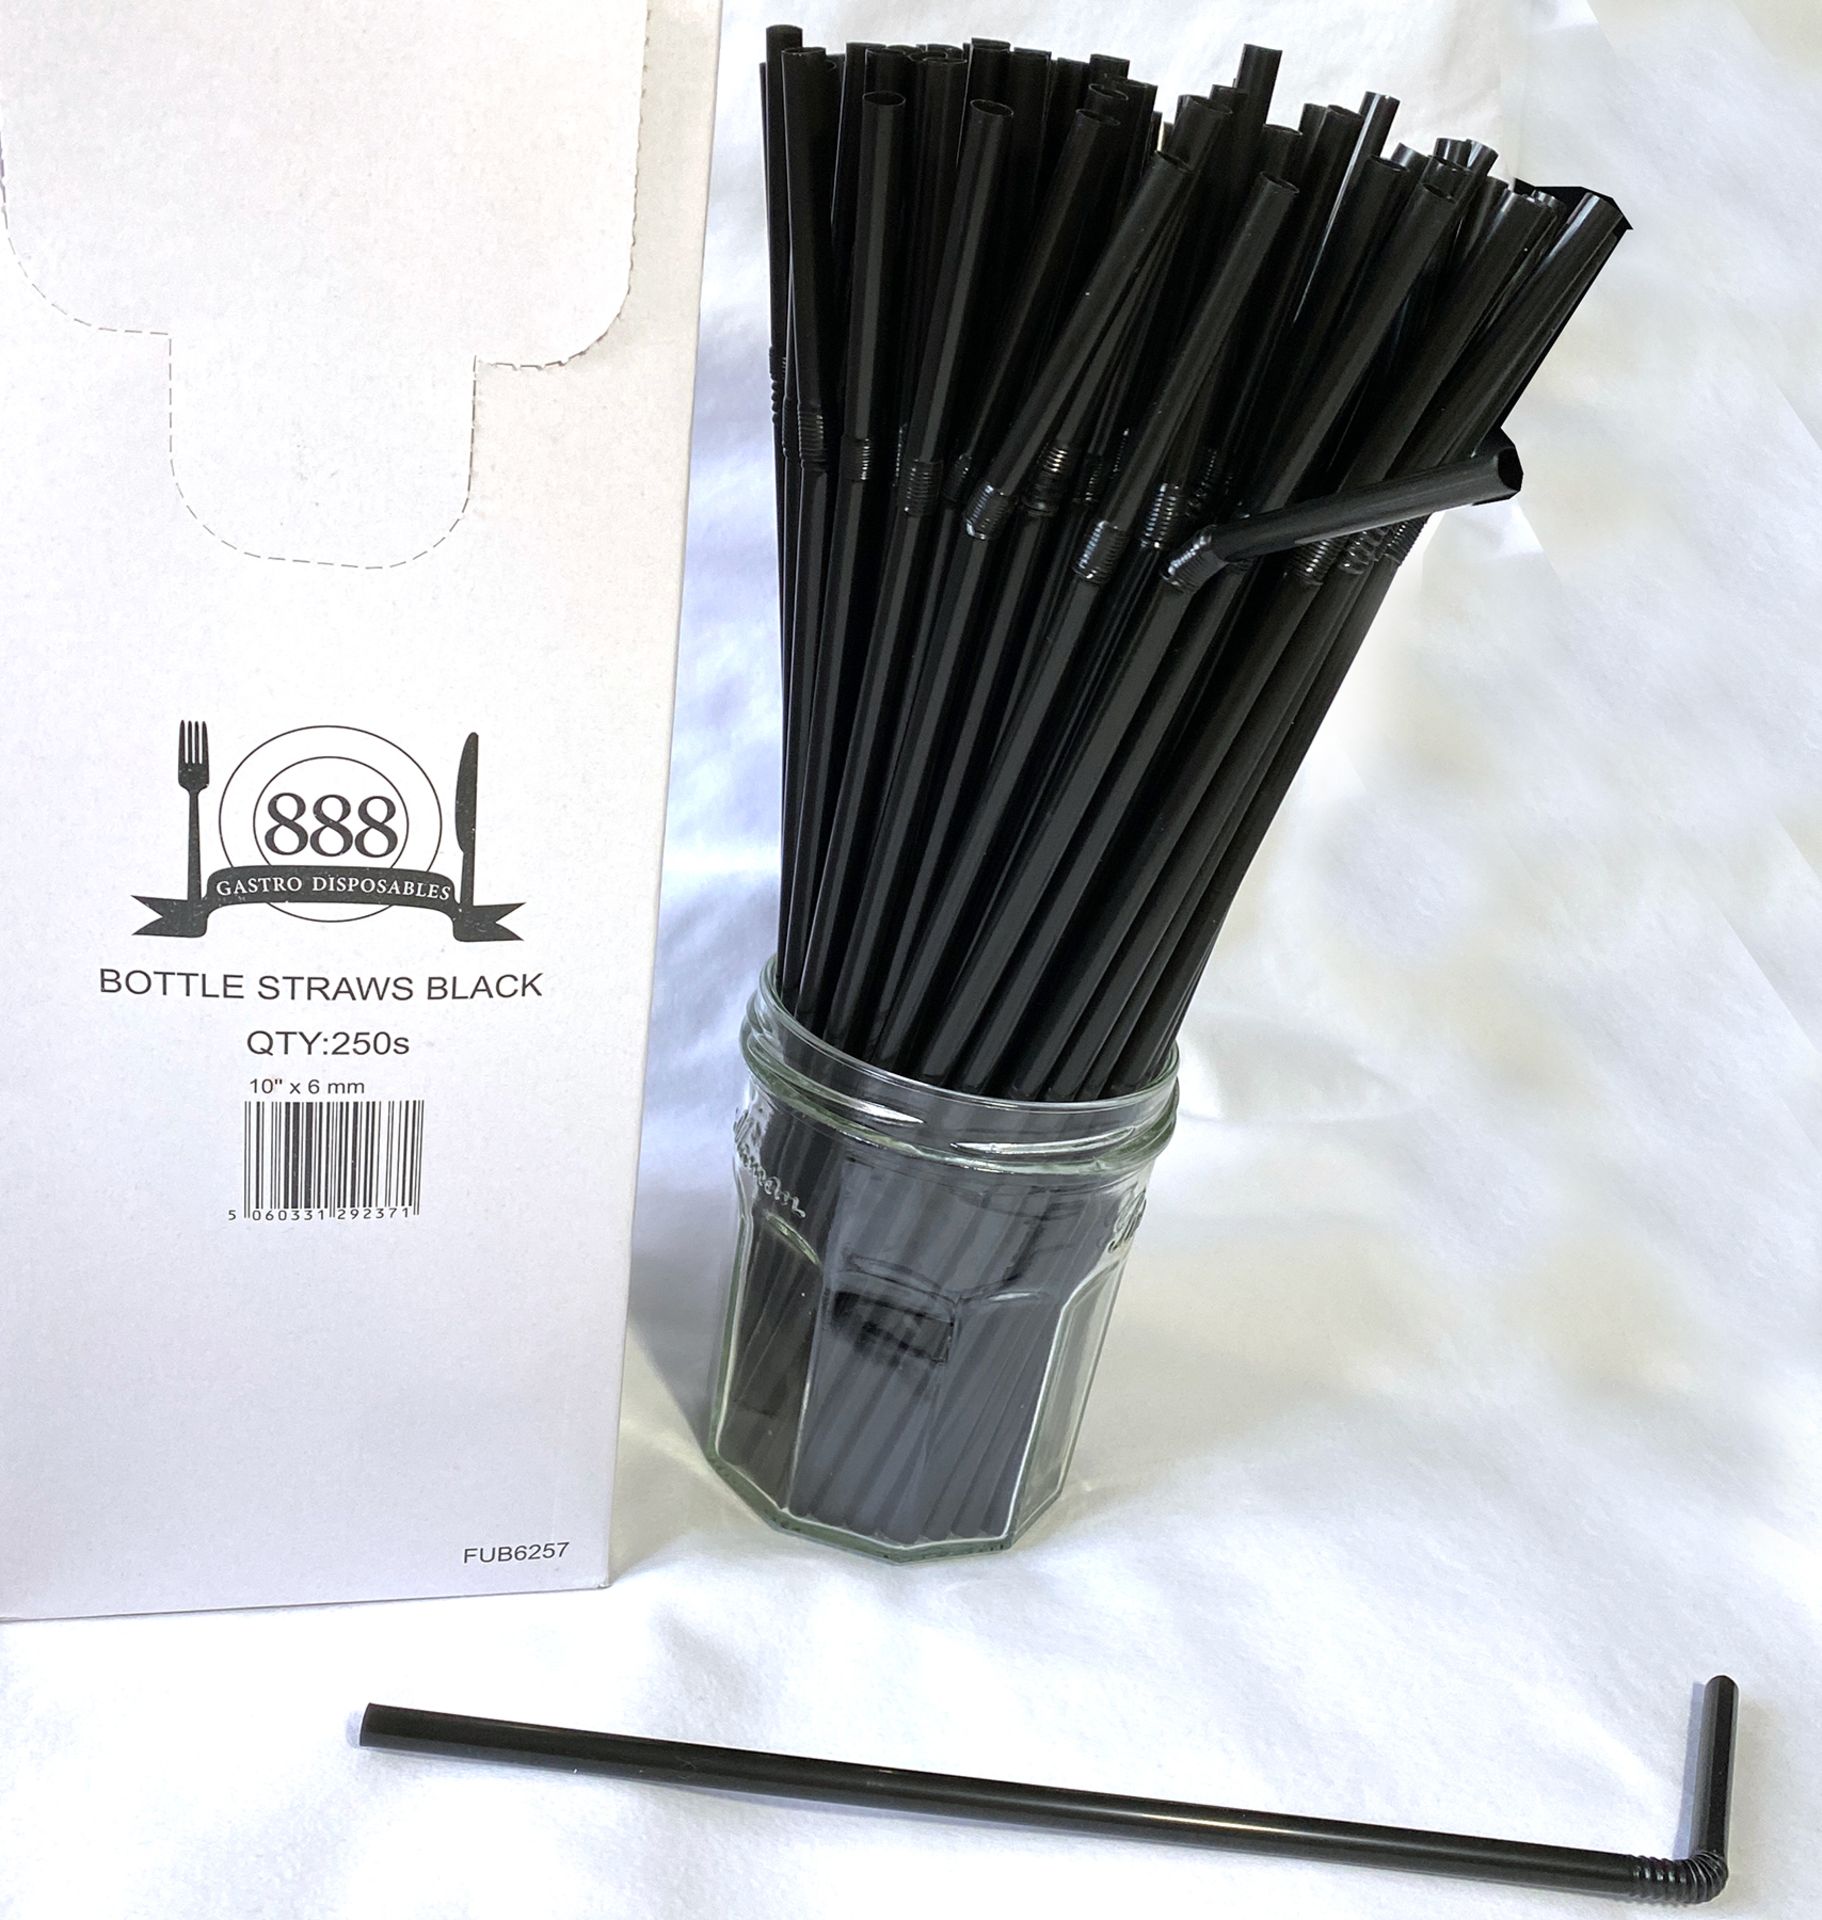 5 x Boxes of Flexible Bottle Straws by 888 Gastro Disposables - Image 2 of 3